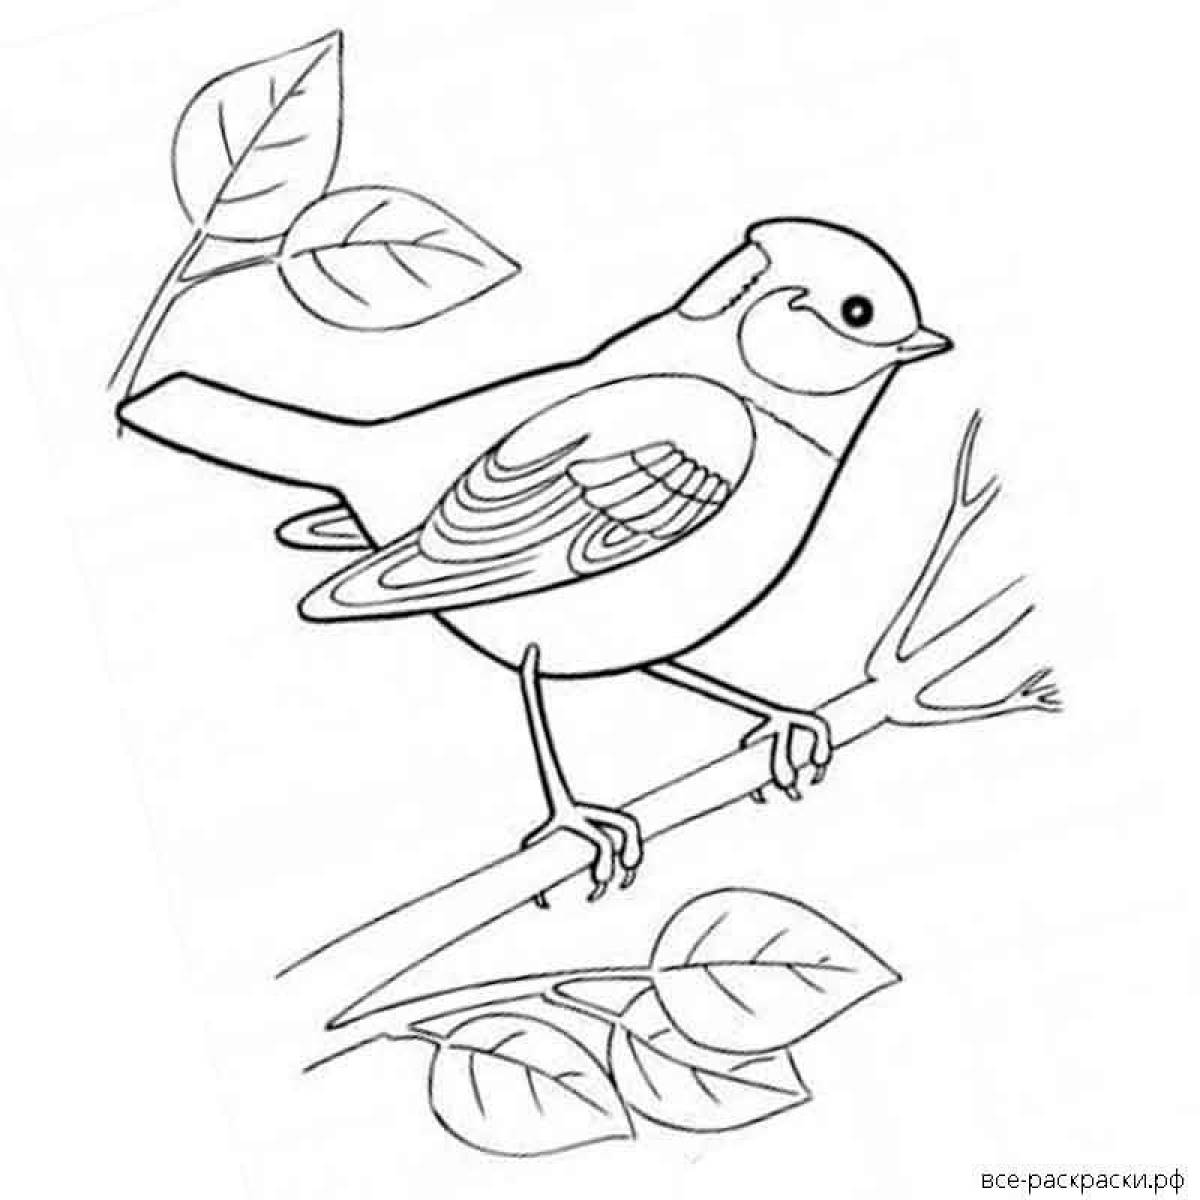 Coloring page energetic titmouse for kids